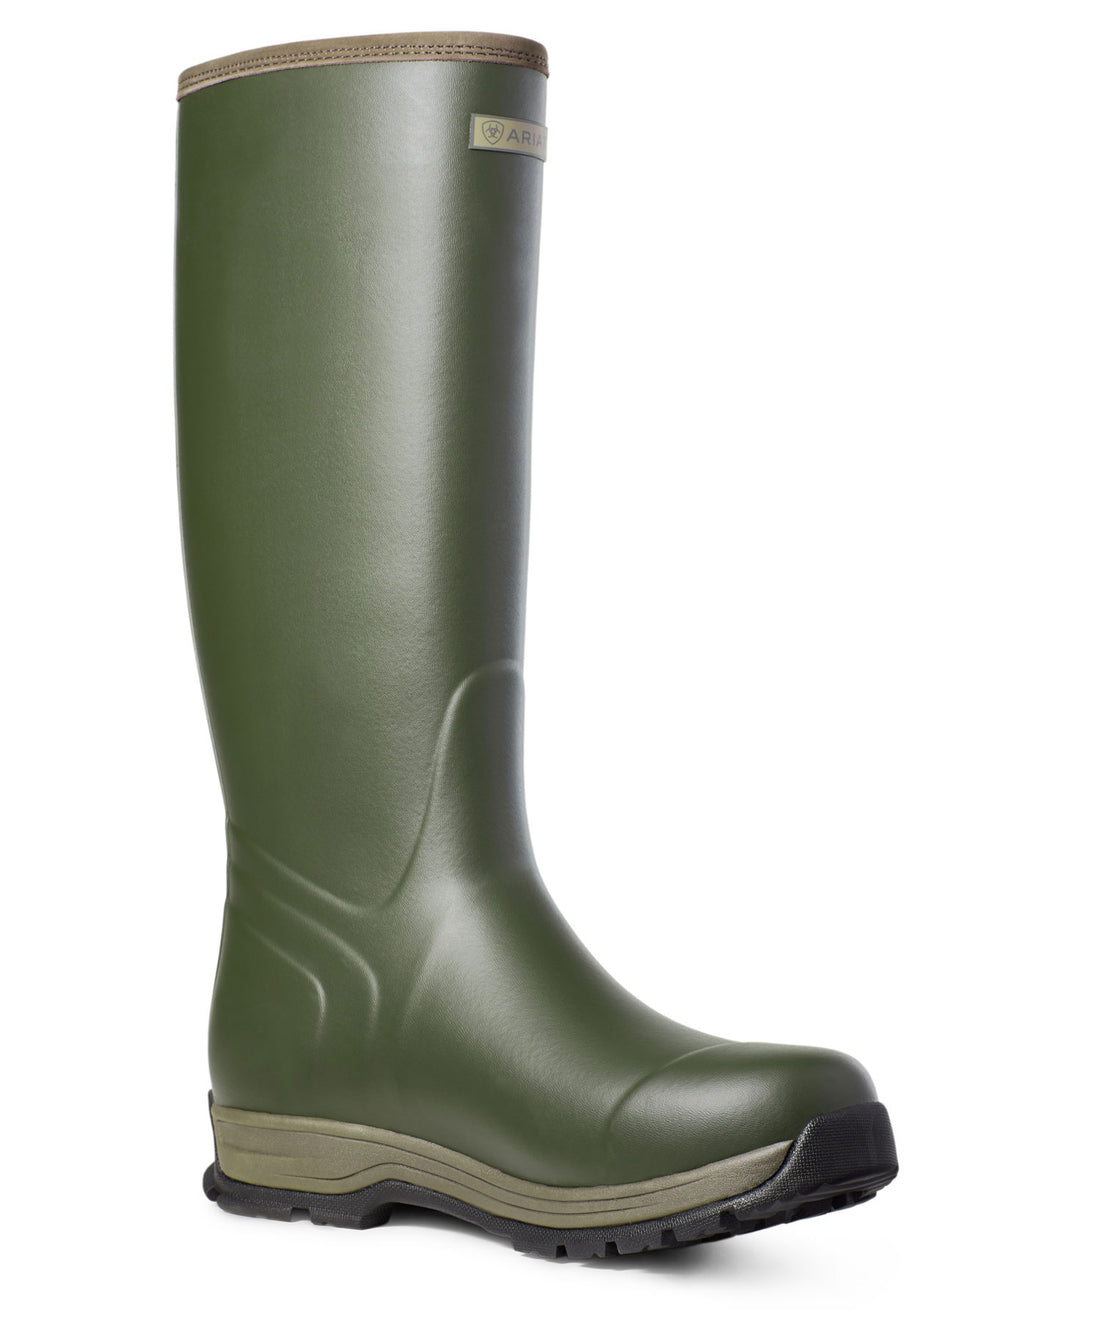 Ariat Men's Burford Insulated Wellington Boots